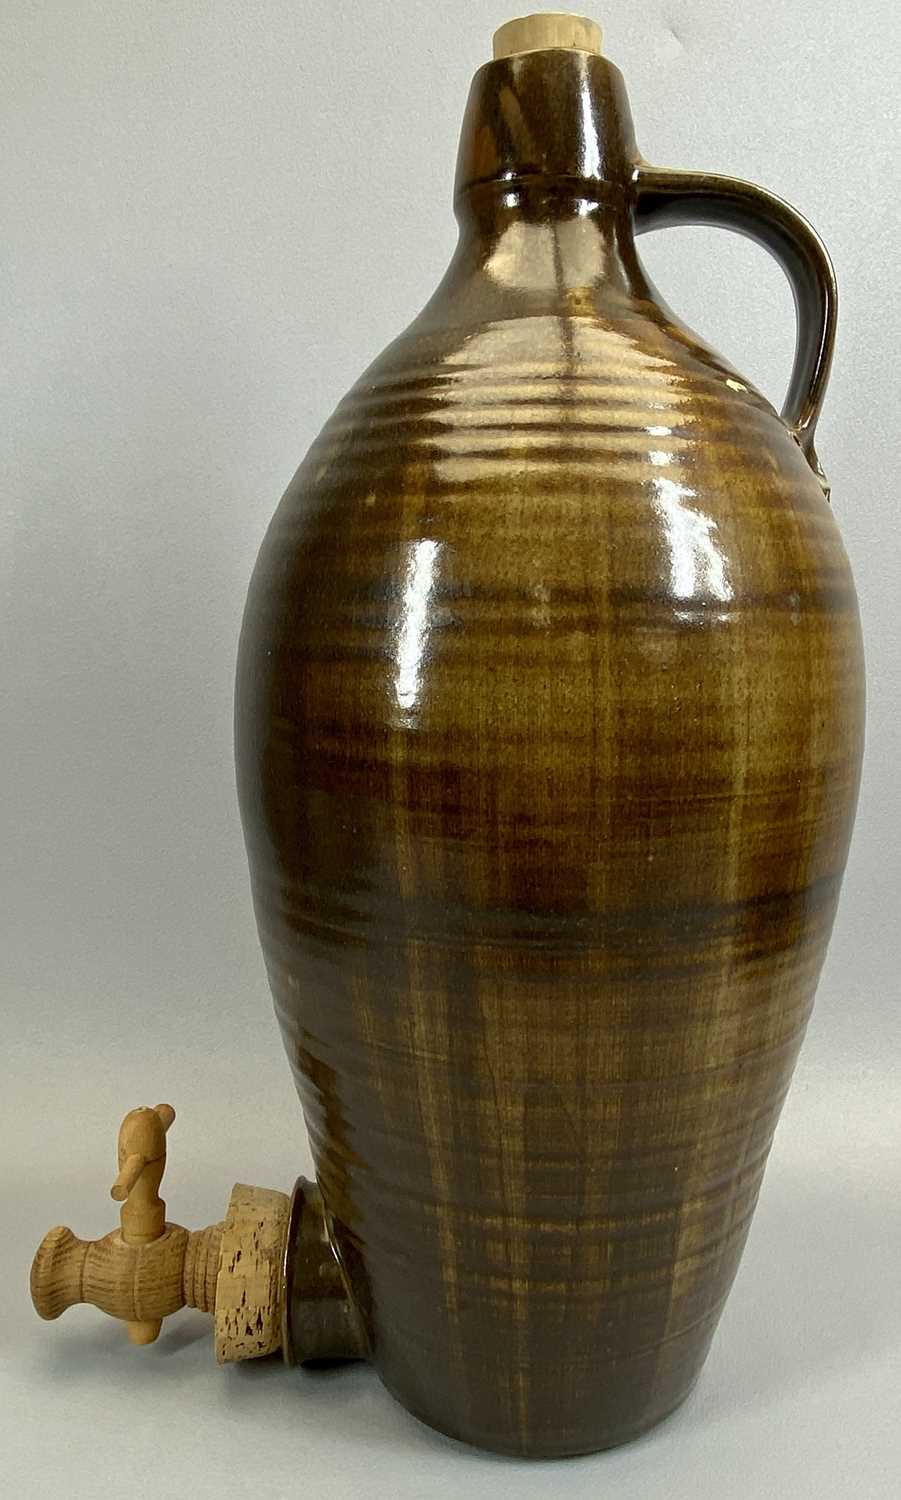 STUDIO POTTERY FLAGON - of ribbed ovoid form with side handle, brown drip glazed with stopper and - Image 2 of 2